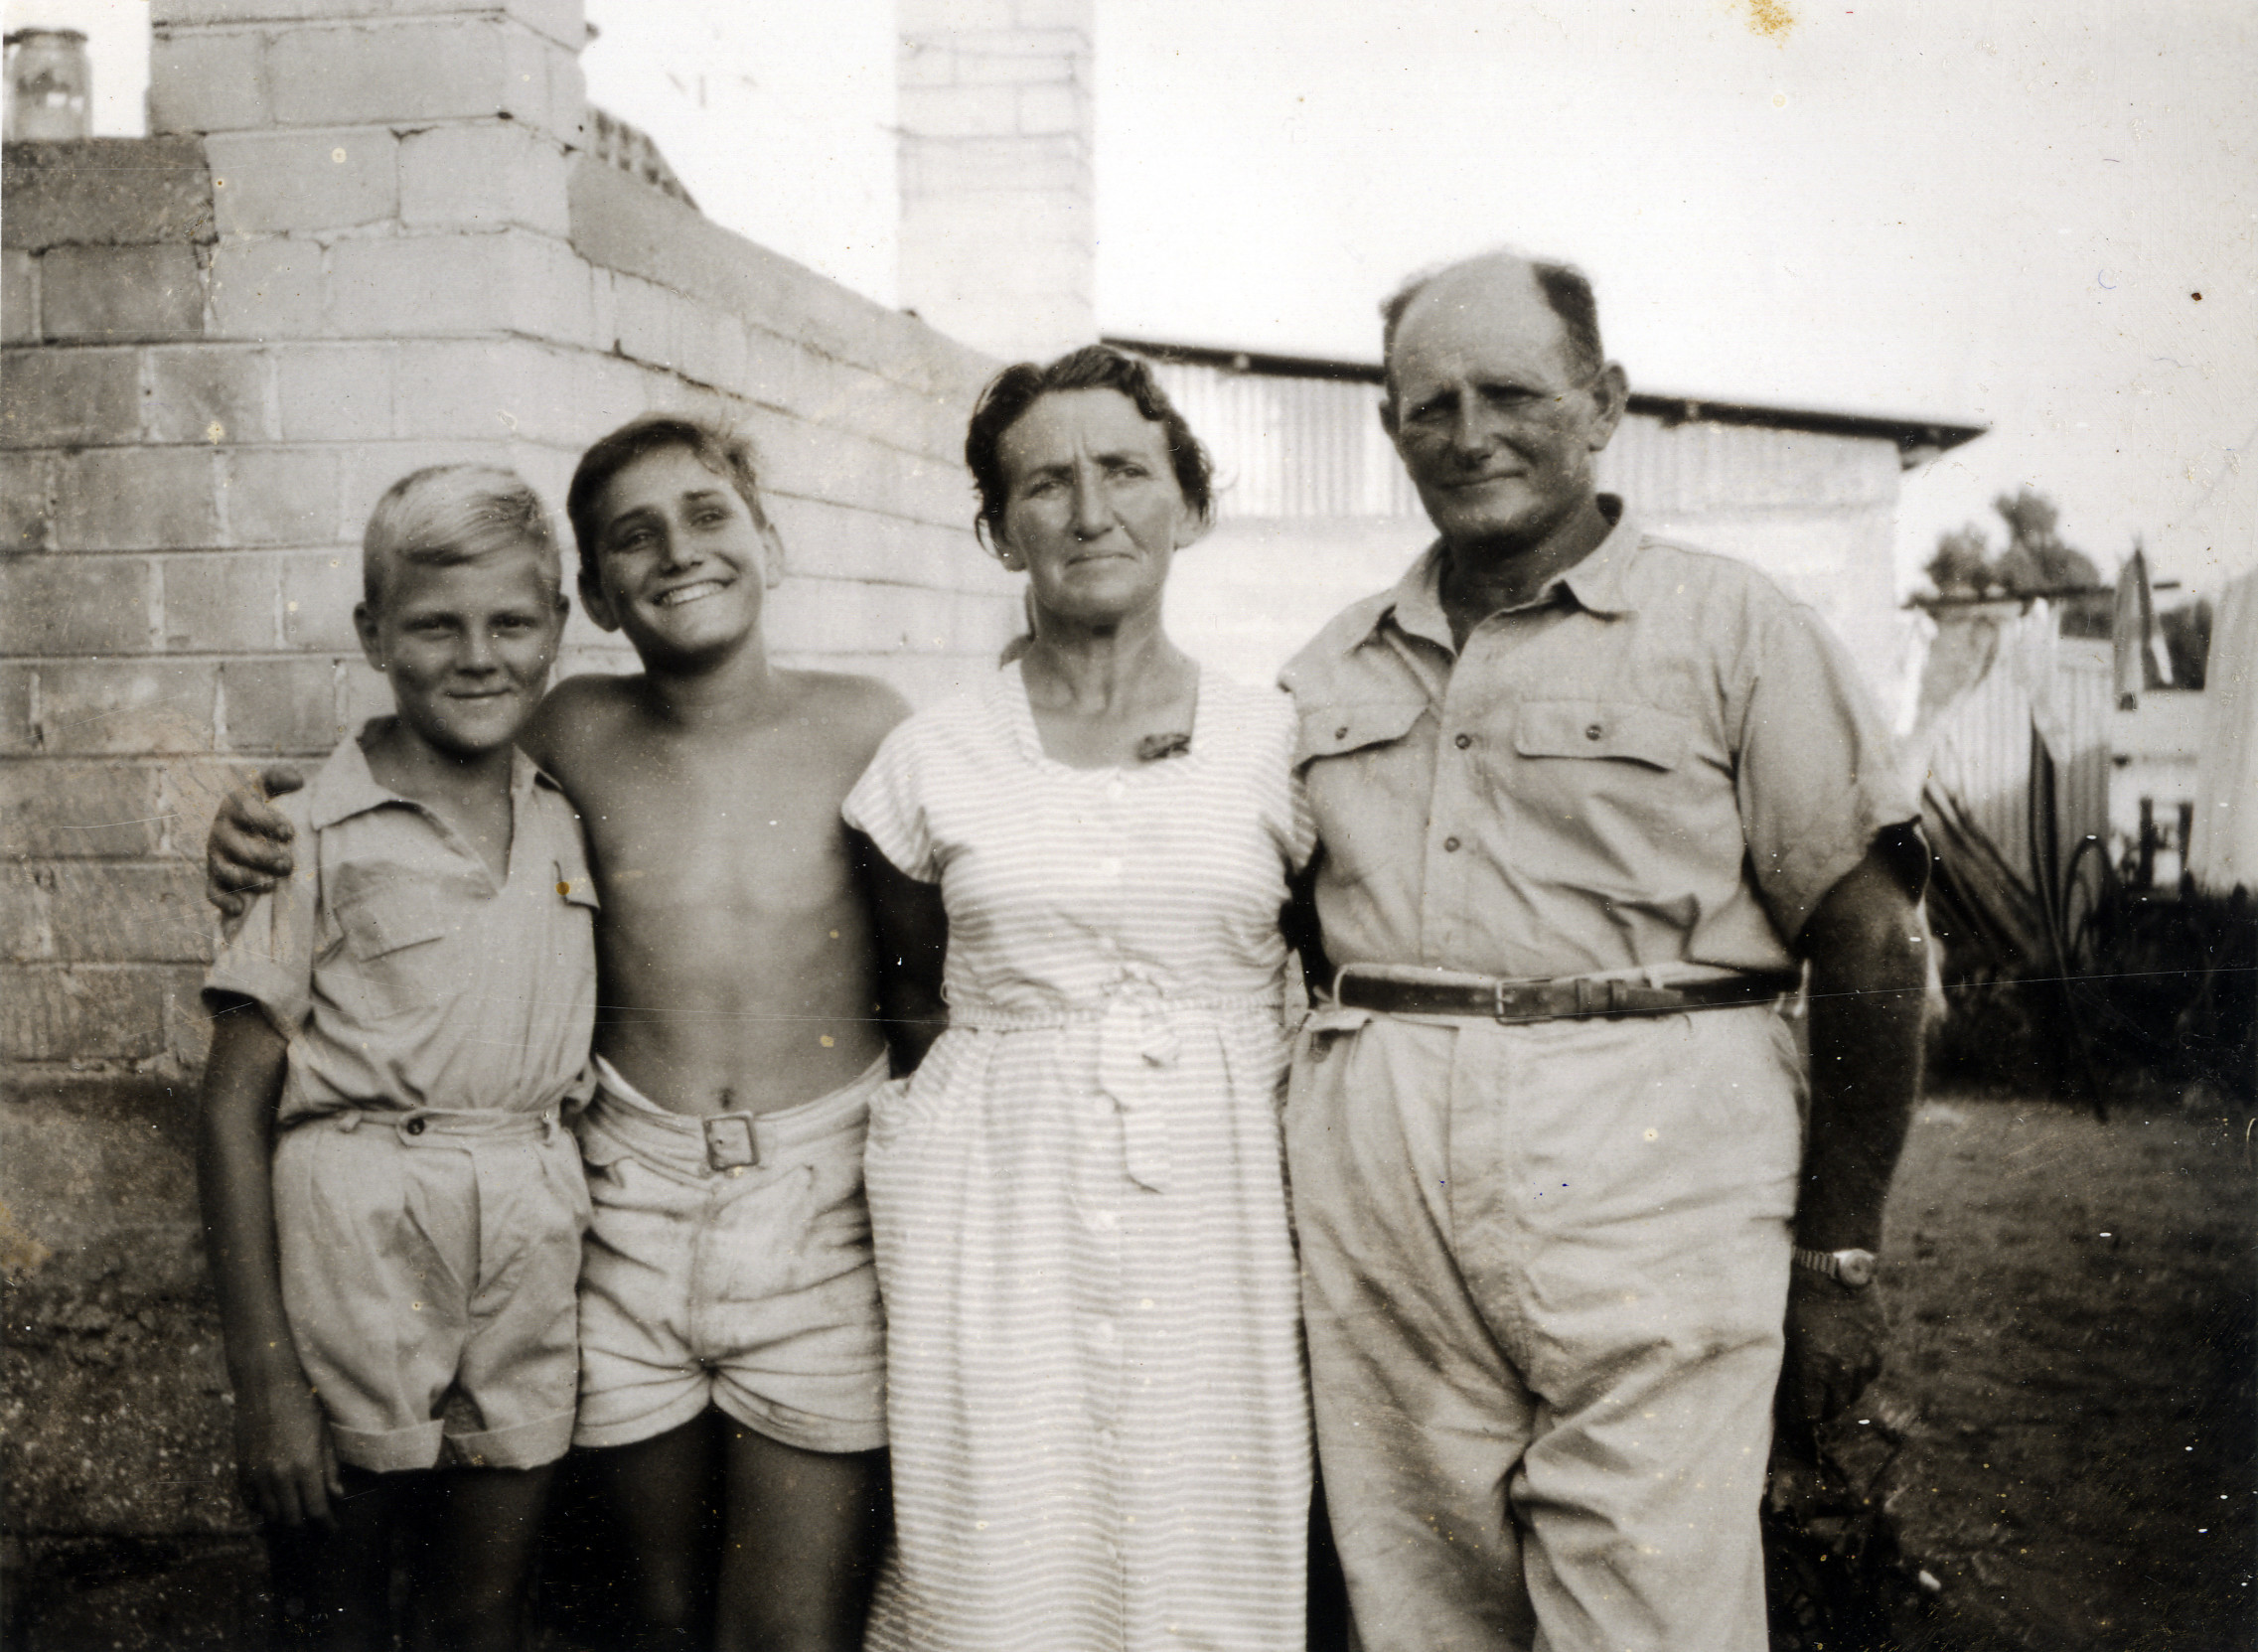 A young boy born in the Bergen-Belsen displaced persons camp, with his adoptive family in Israel.

PIctured (left to right) are Izak Szewelewicz with Giora, Salin, and Michel Bernay.